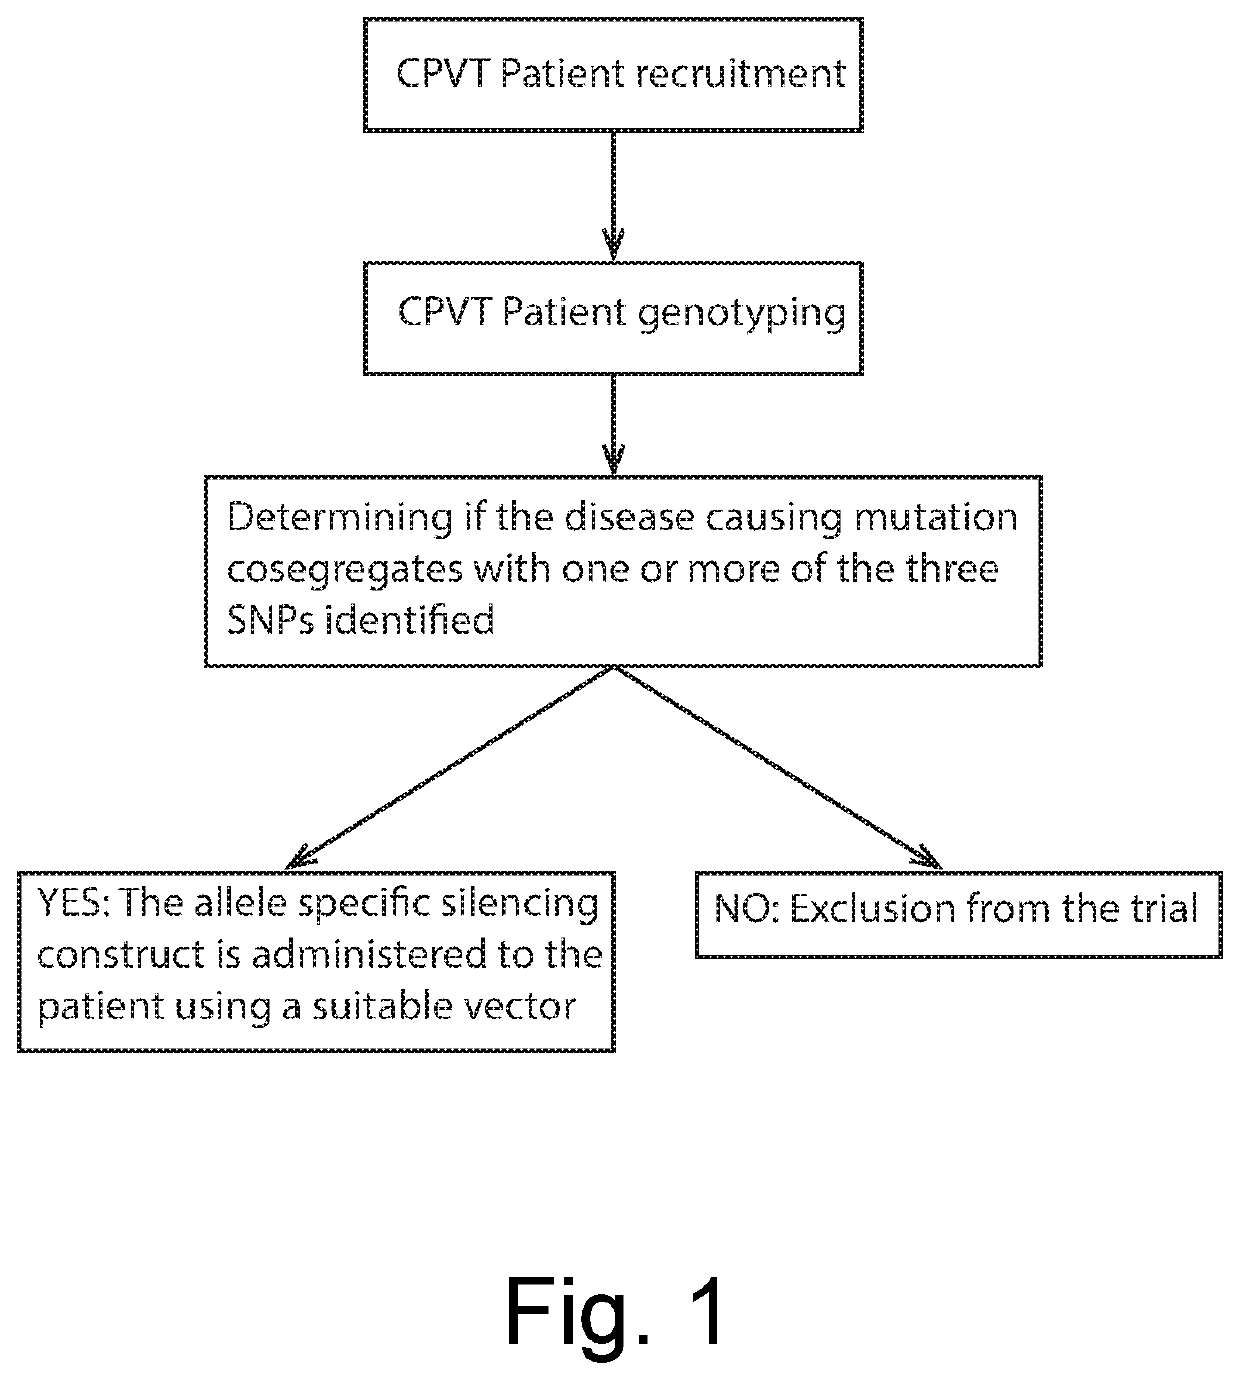 Method of allele specific silencing for the treatment of autosomal dominant catecholaminergic polymorphic ventricular tachycardia (CPVT)